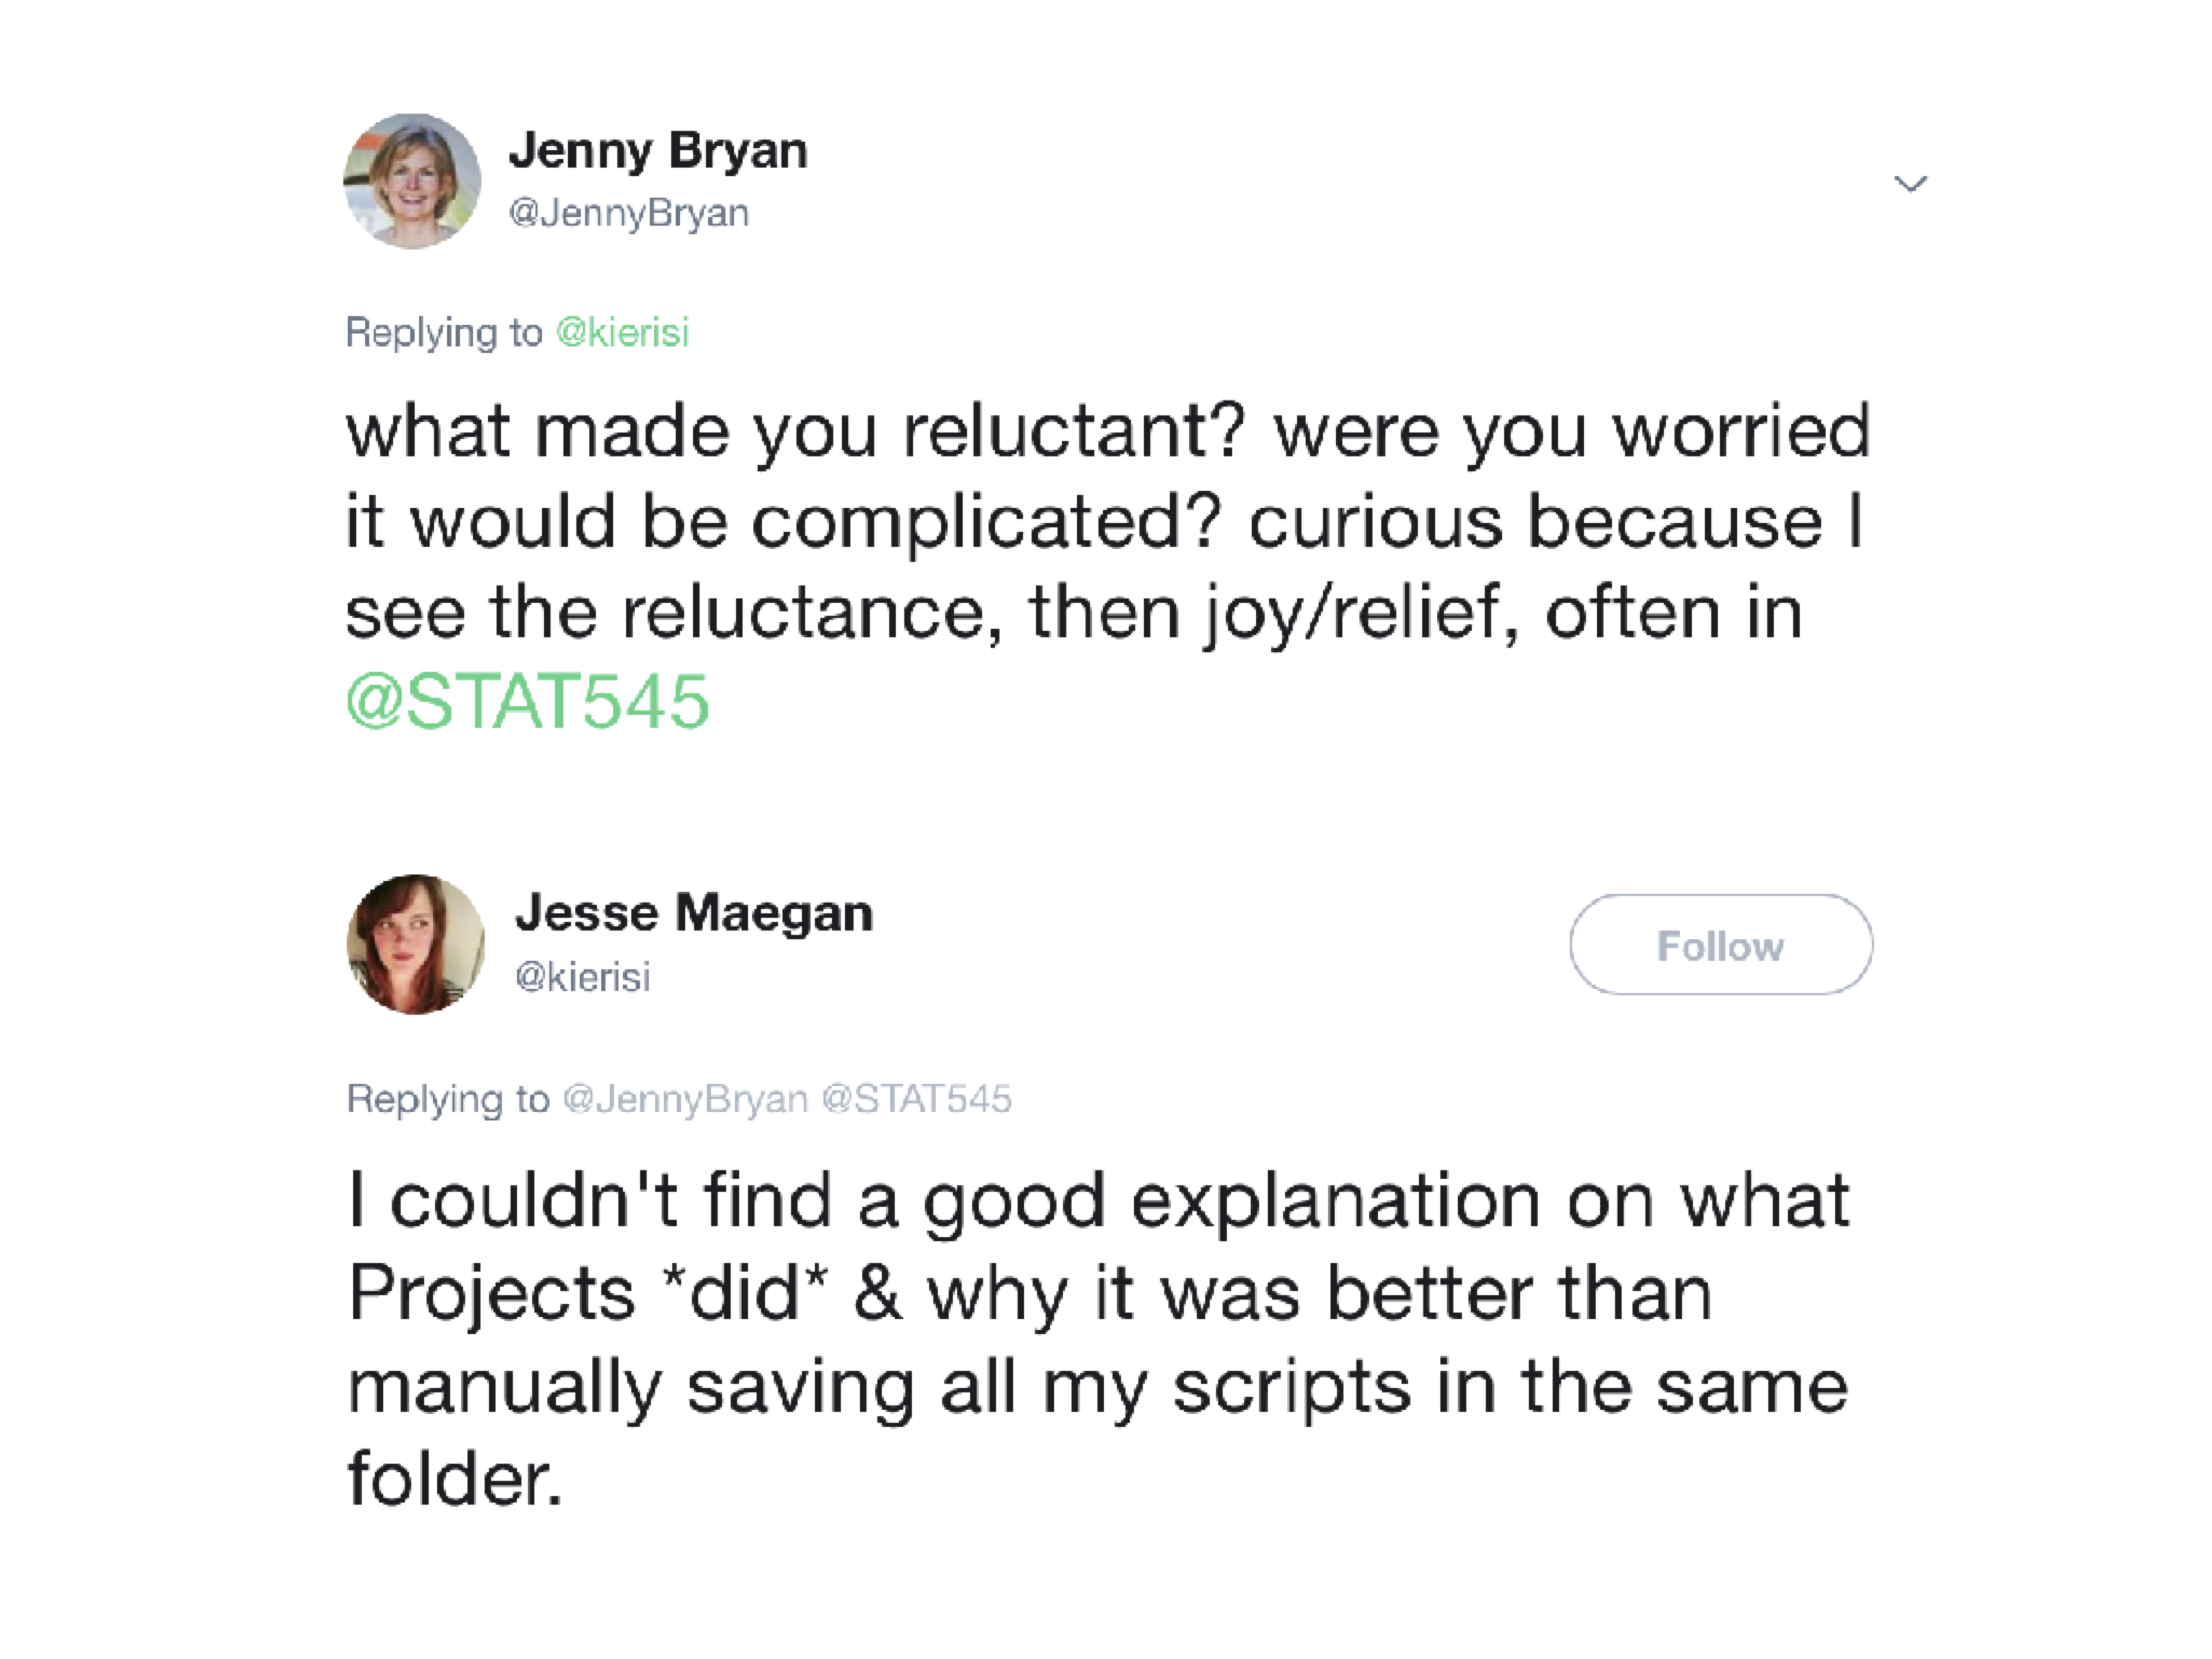 a twitter thread:  @JennyBryan what made you reluctant? 
were you worried it would be complicated? curious because I see the reluctance, then joy/relief, 
often in STAT545. @kierisi I couldn't find any good explanation on what Projects did and why it 
was better than manually saving all my R scripts in the same folder